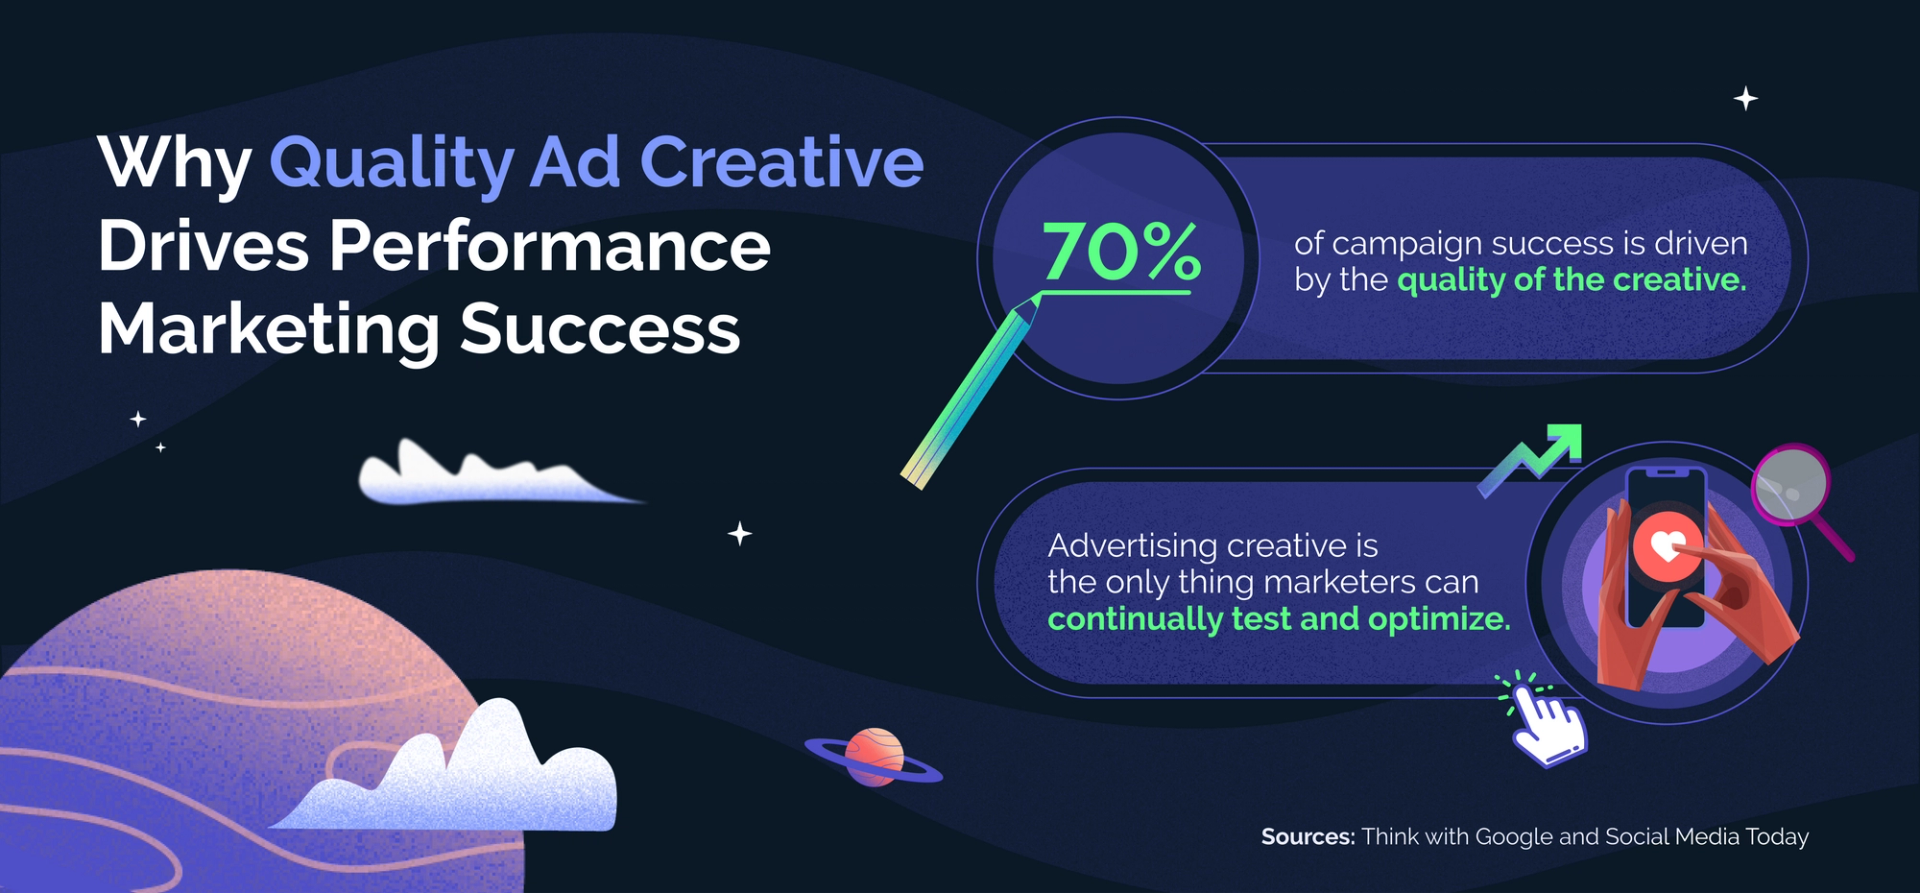 Infographic that highlights two points: 70% of campaign performance is driven by the quality of the creative and advertising creative is the only thing marketers can continually test and optimize. 